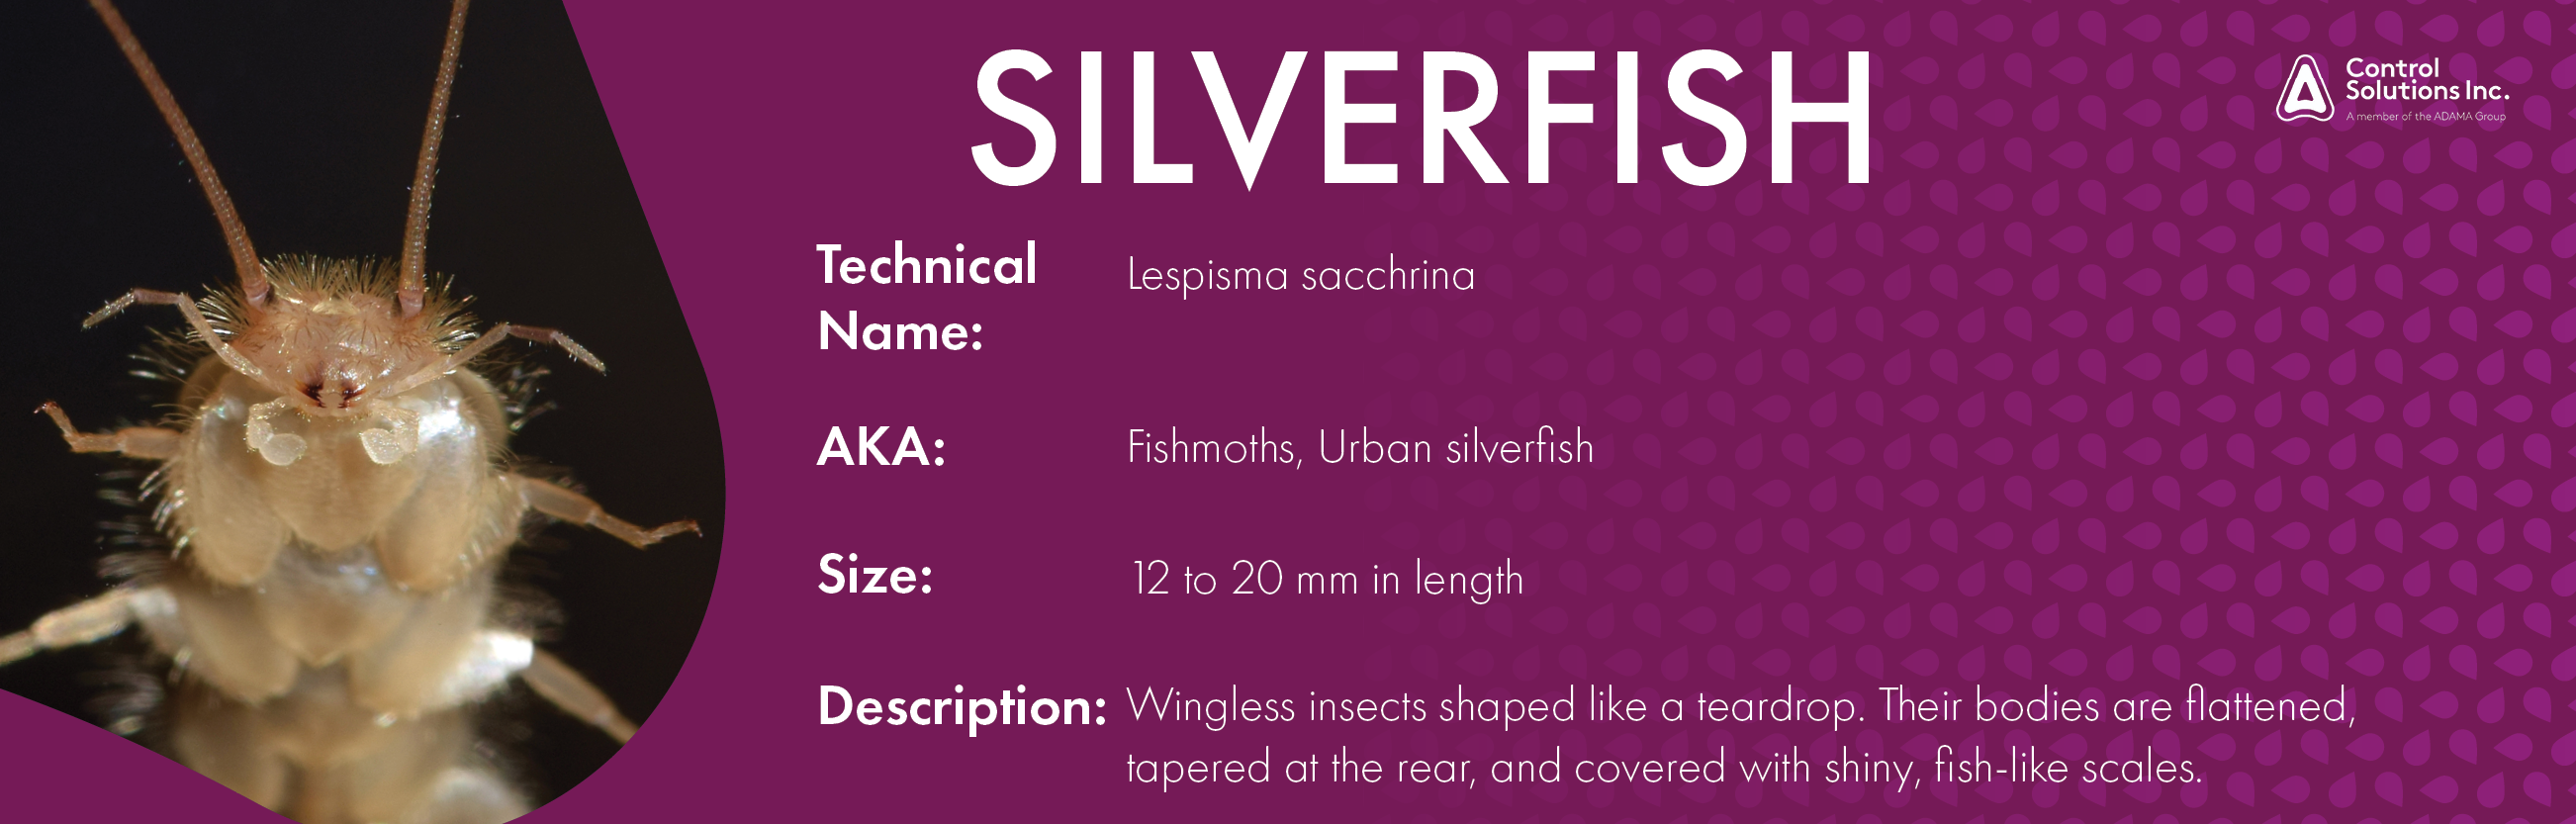 Facts About Silverfish You Won't Believe